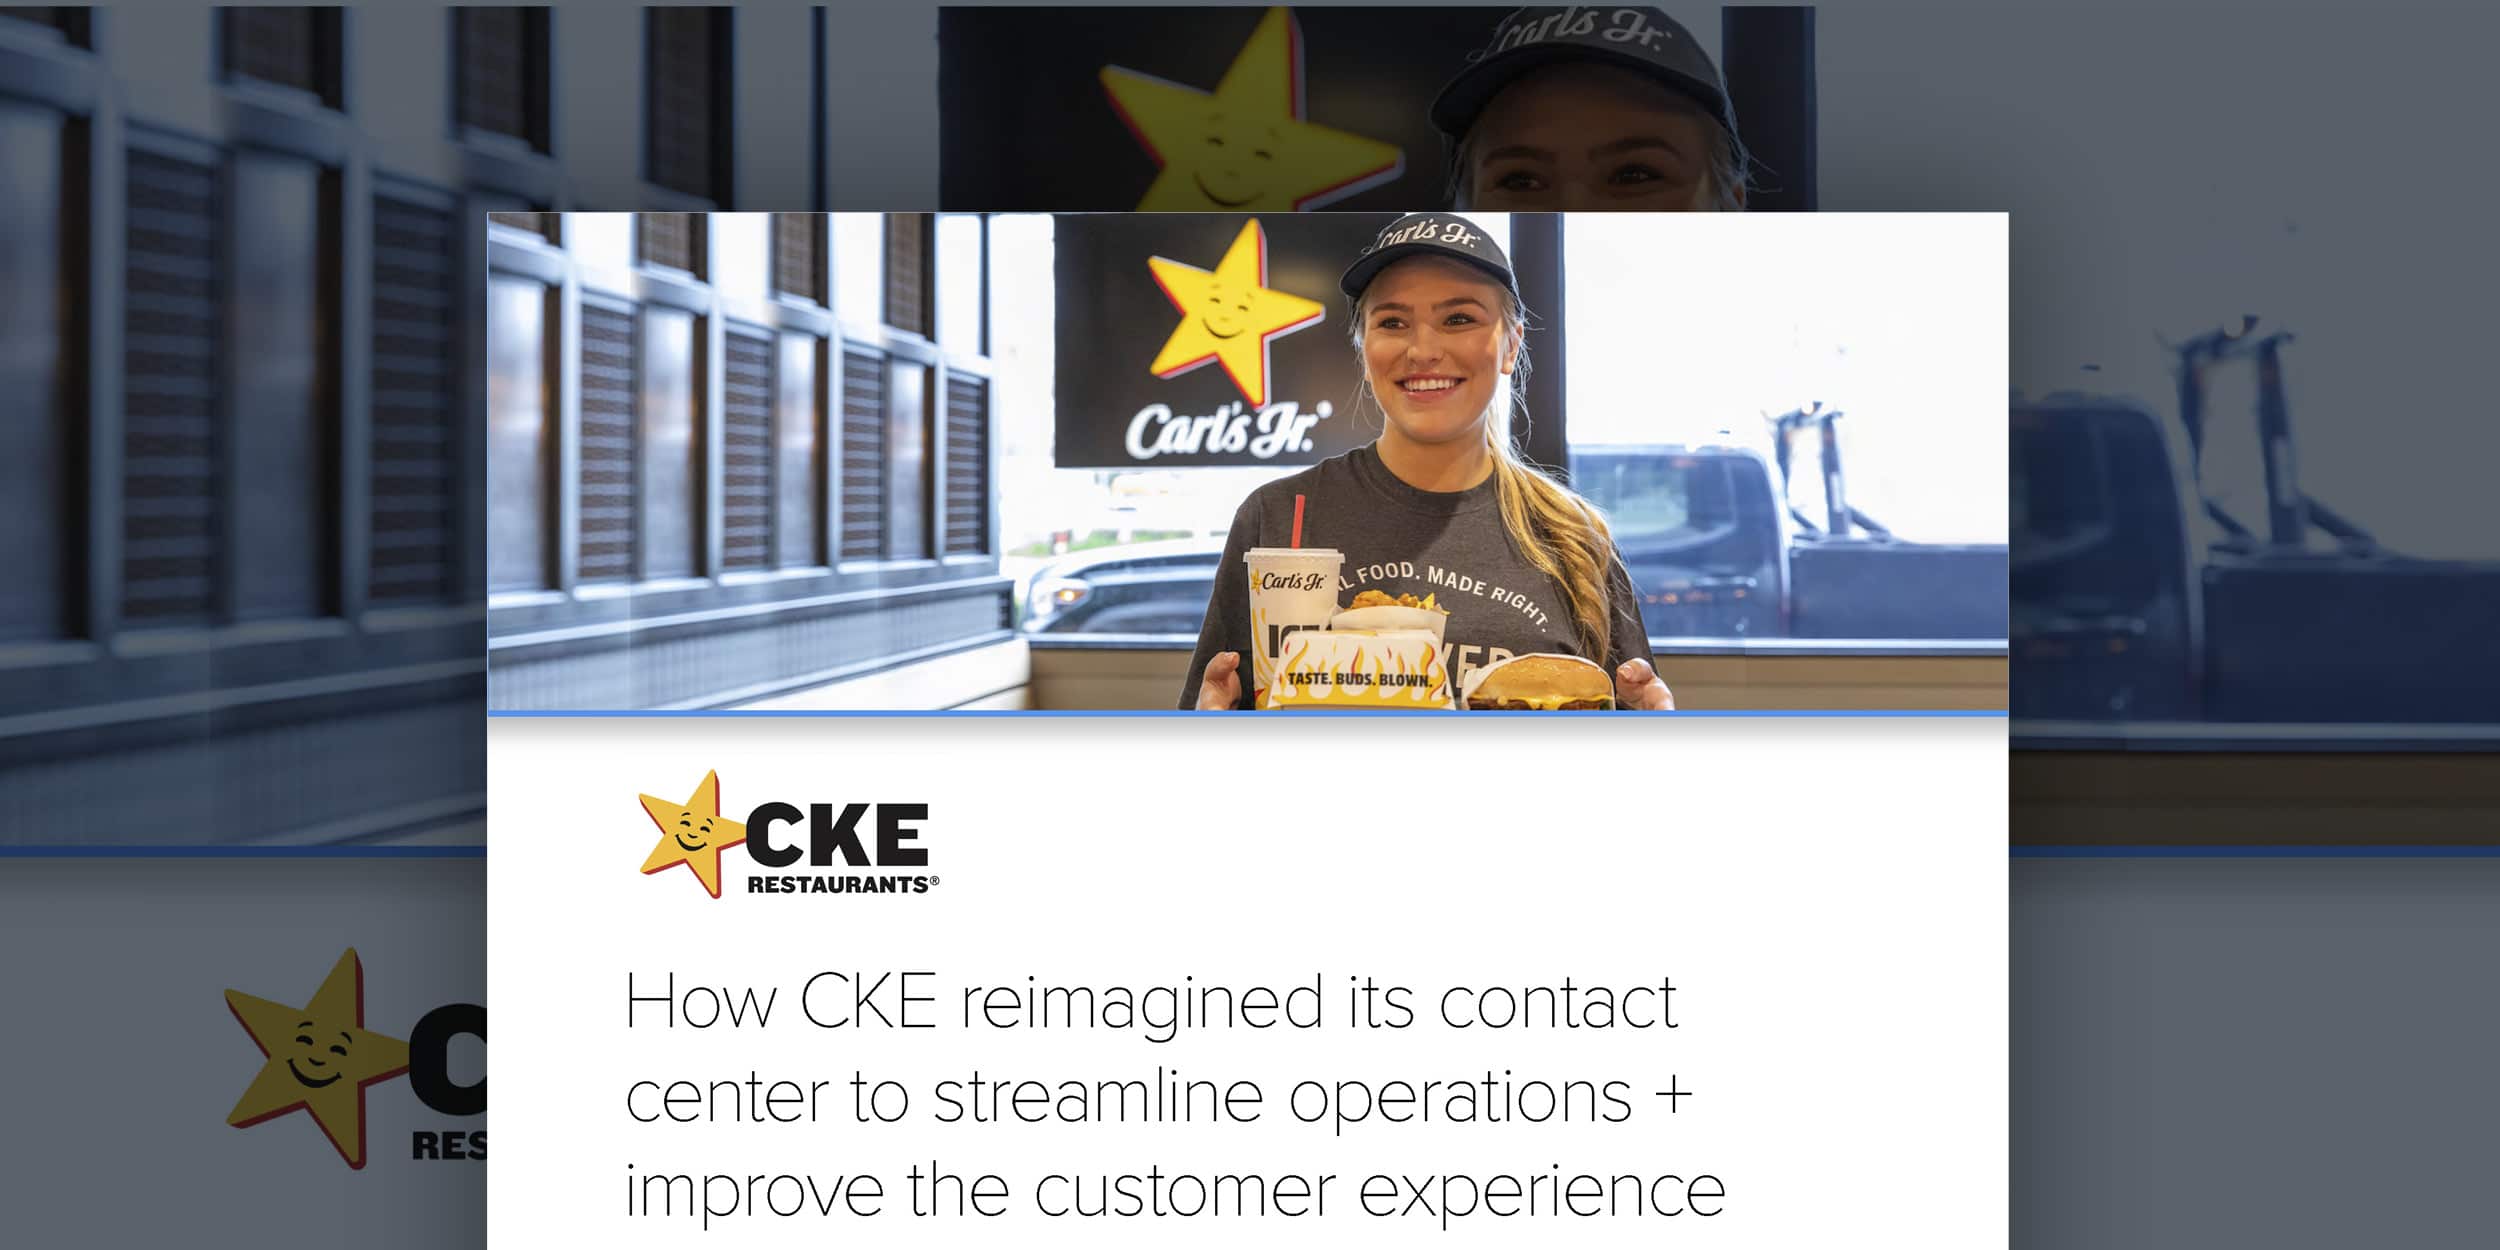 How CKE reimagined its contact center to streamline operations + improve the customer experience